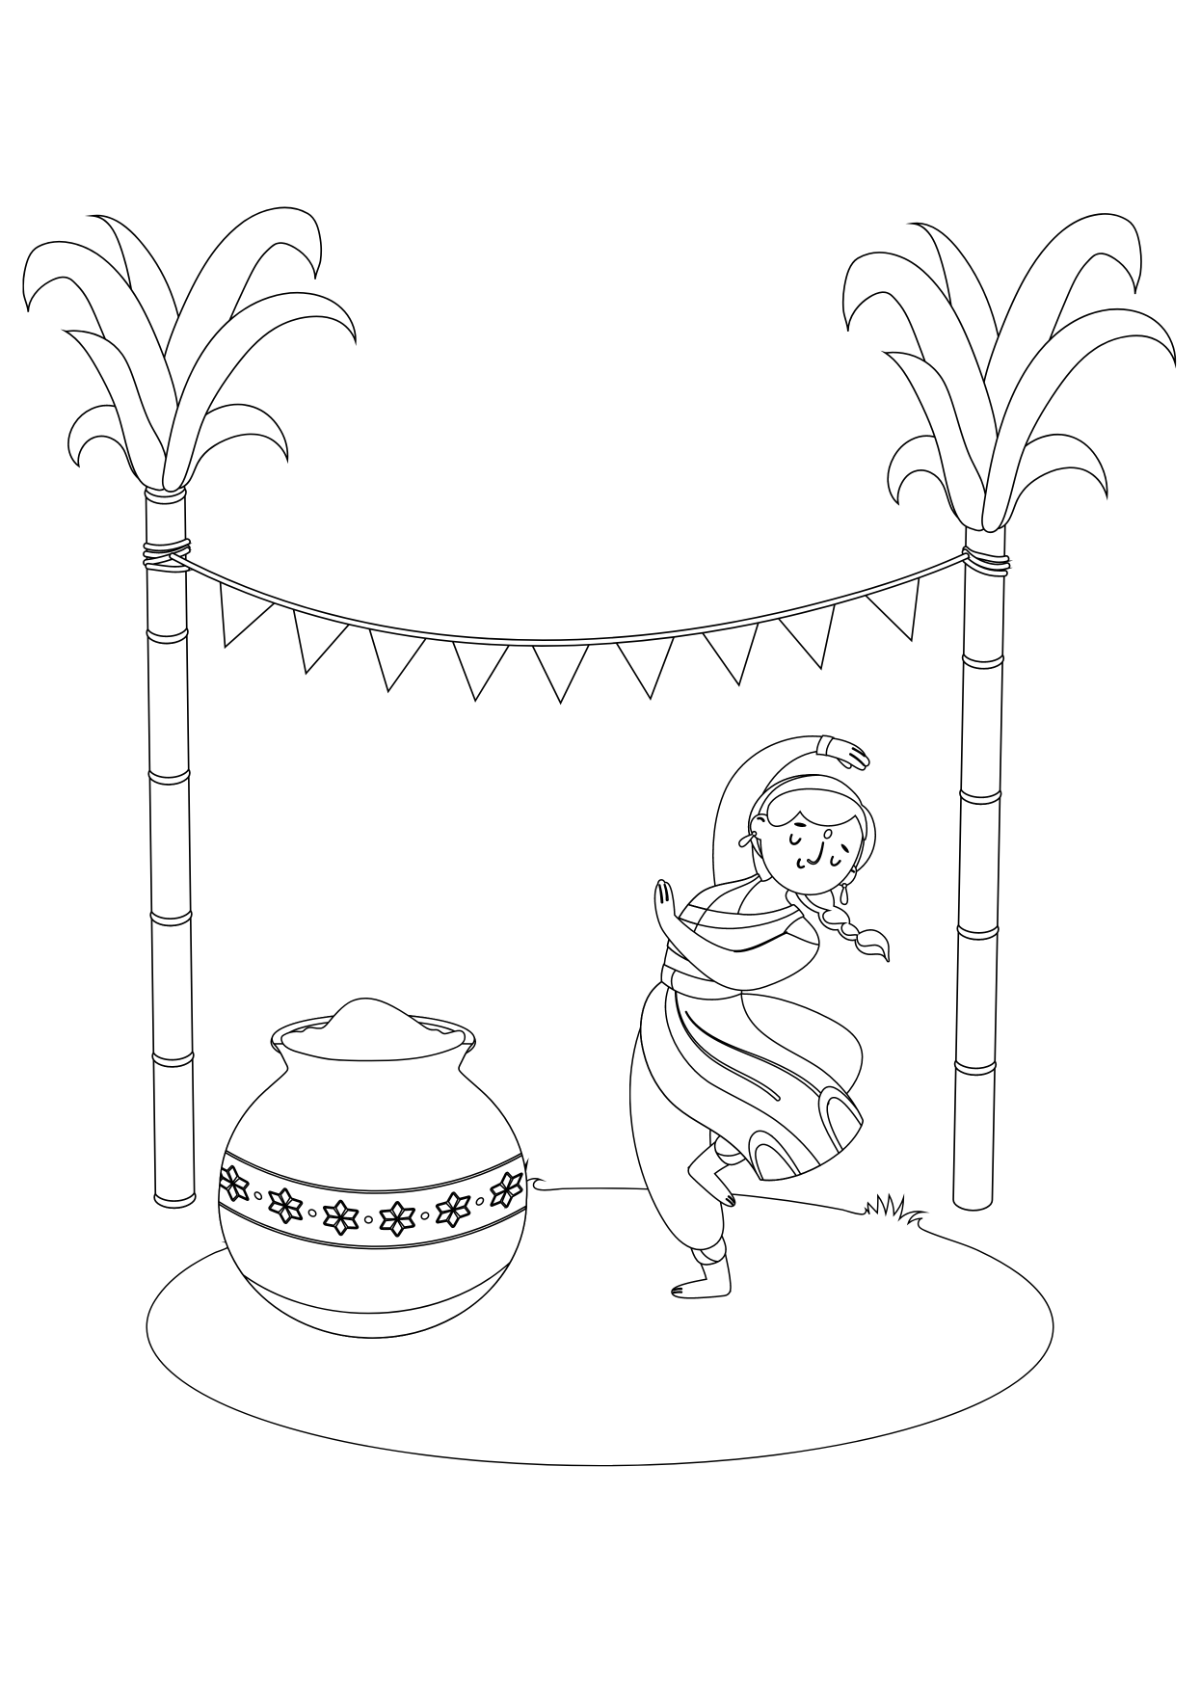 Pongal Drawing for Kids Template